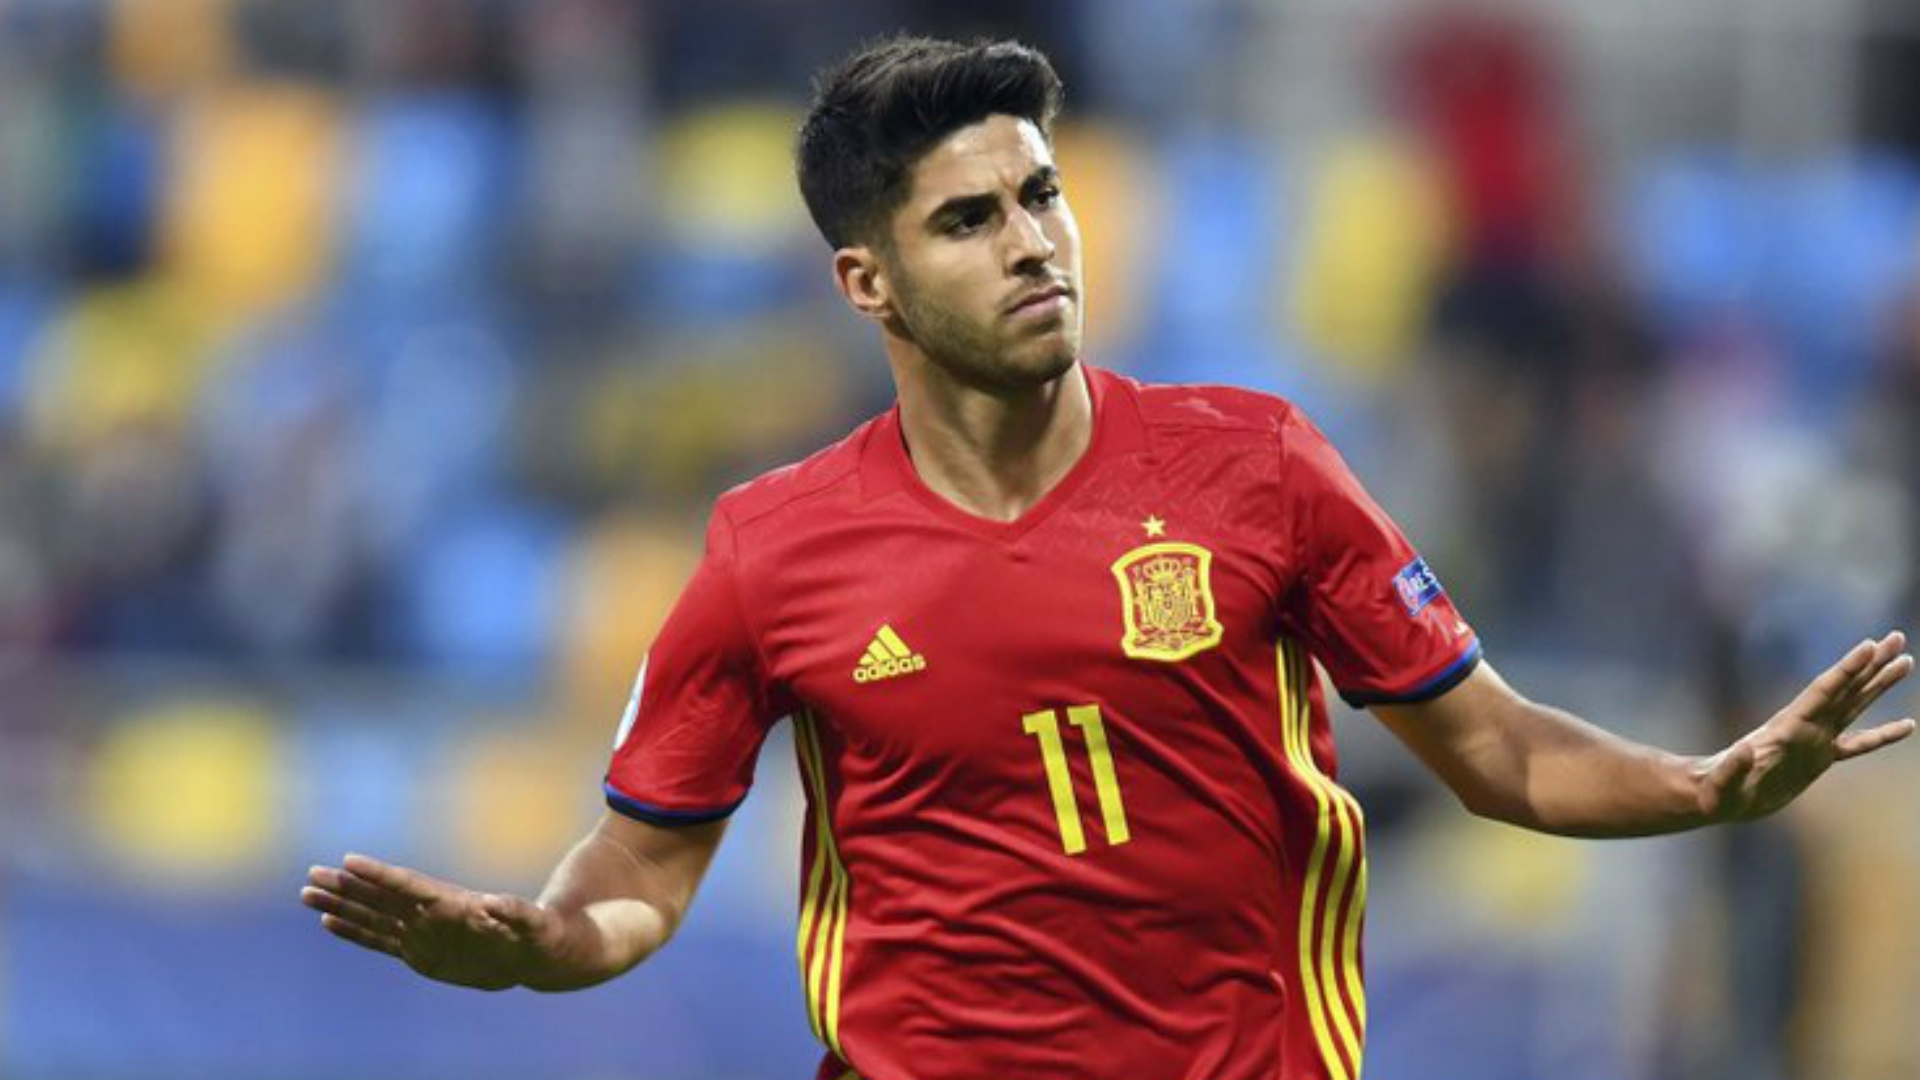 As things stand the Under-21 squad is fortunate to make use of Asensio's talents.